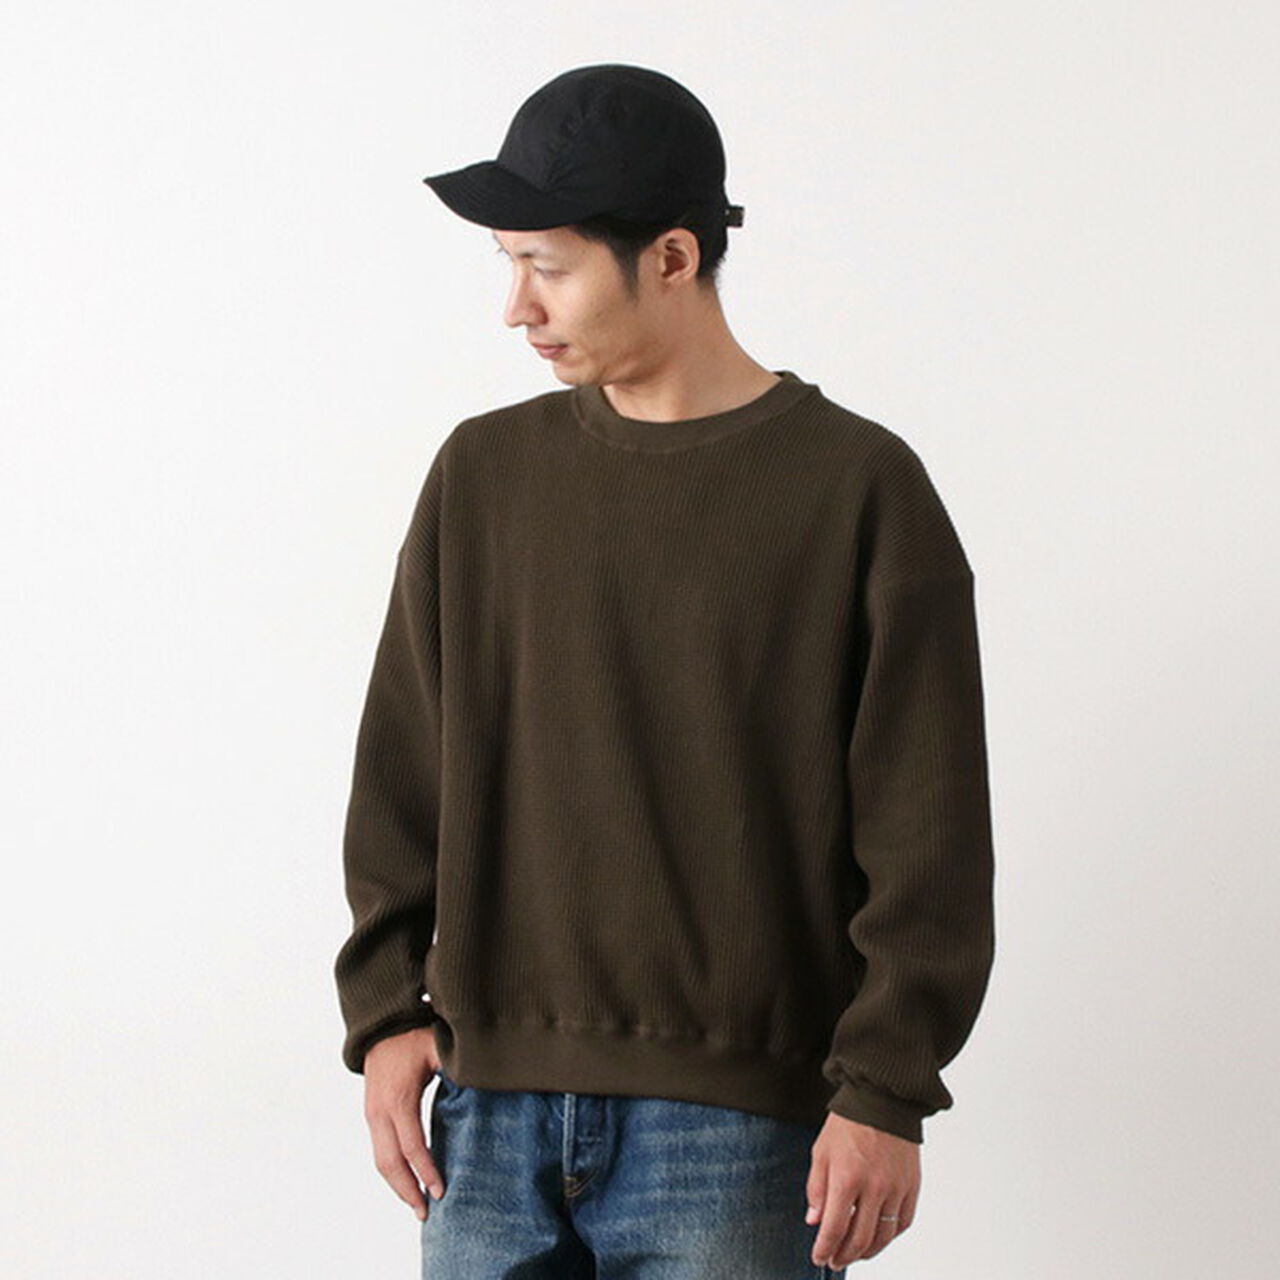 Big Waffle Crew Neck Cut & Sew,Brown, large image number 0